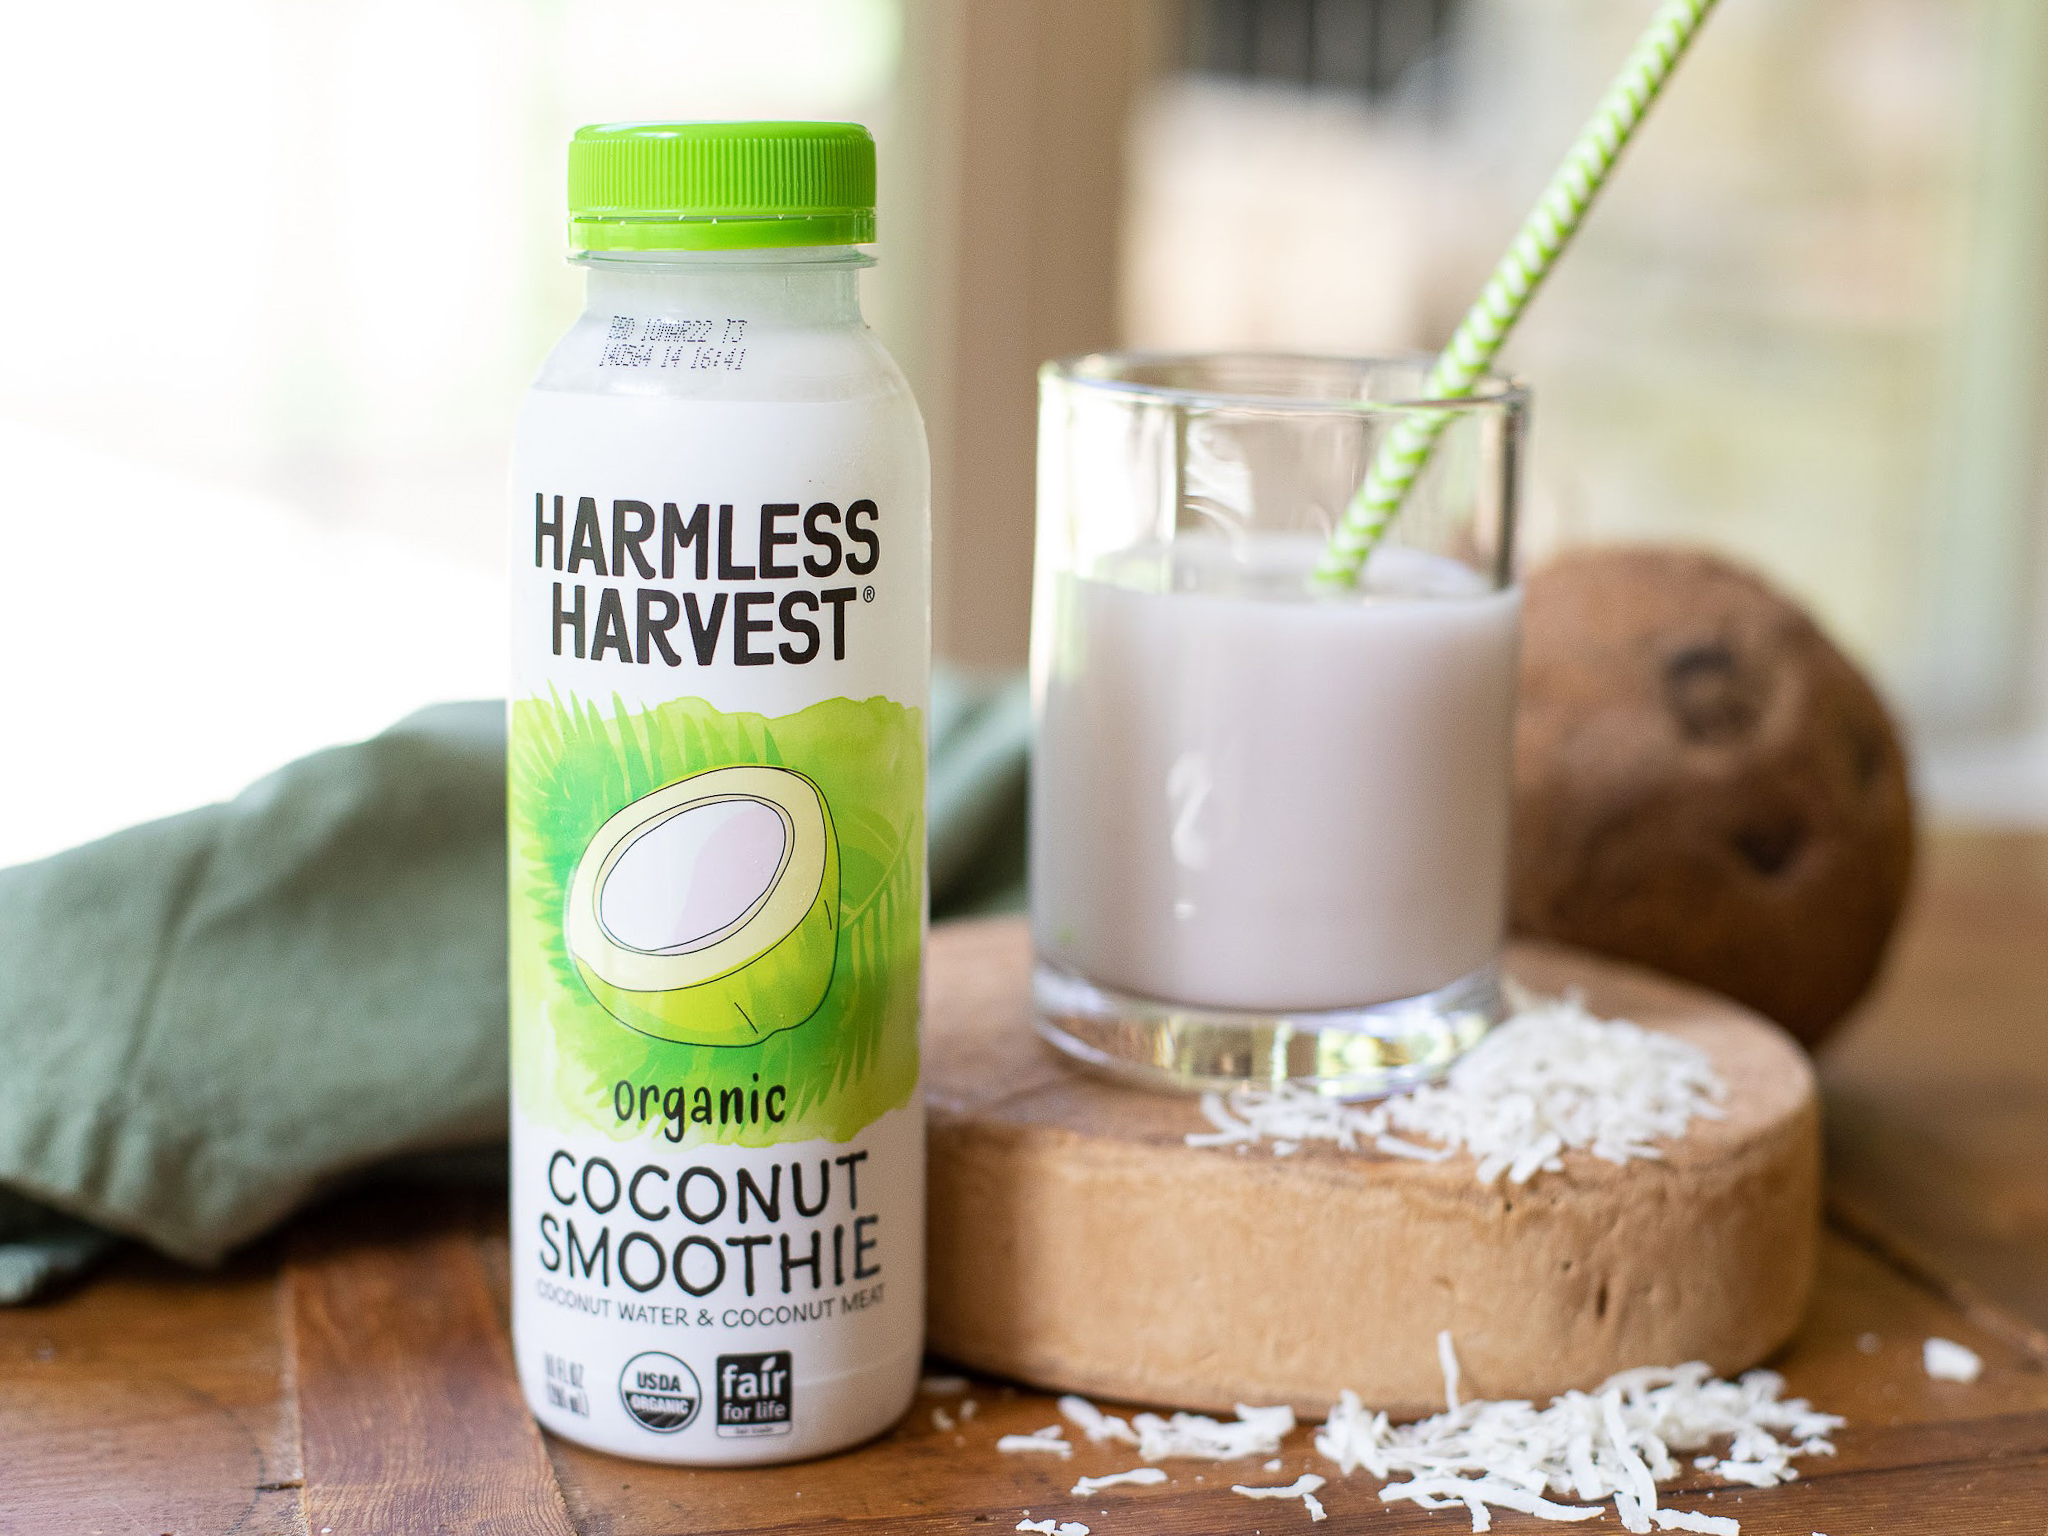 Harmless Harvest Coconut Smoothie Just $2.70 At Publix (Regular Price $3.99)